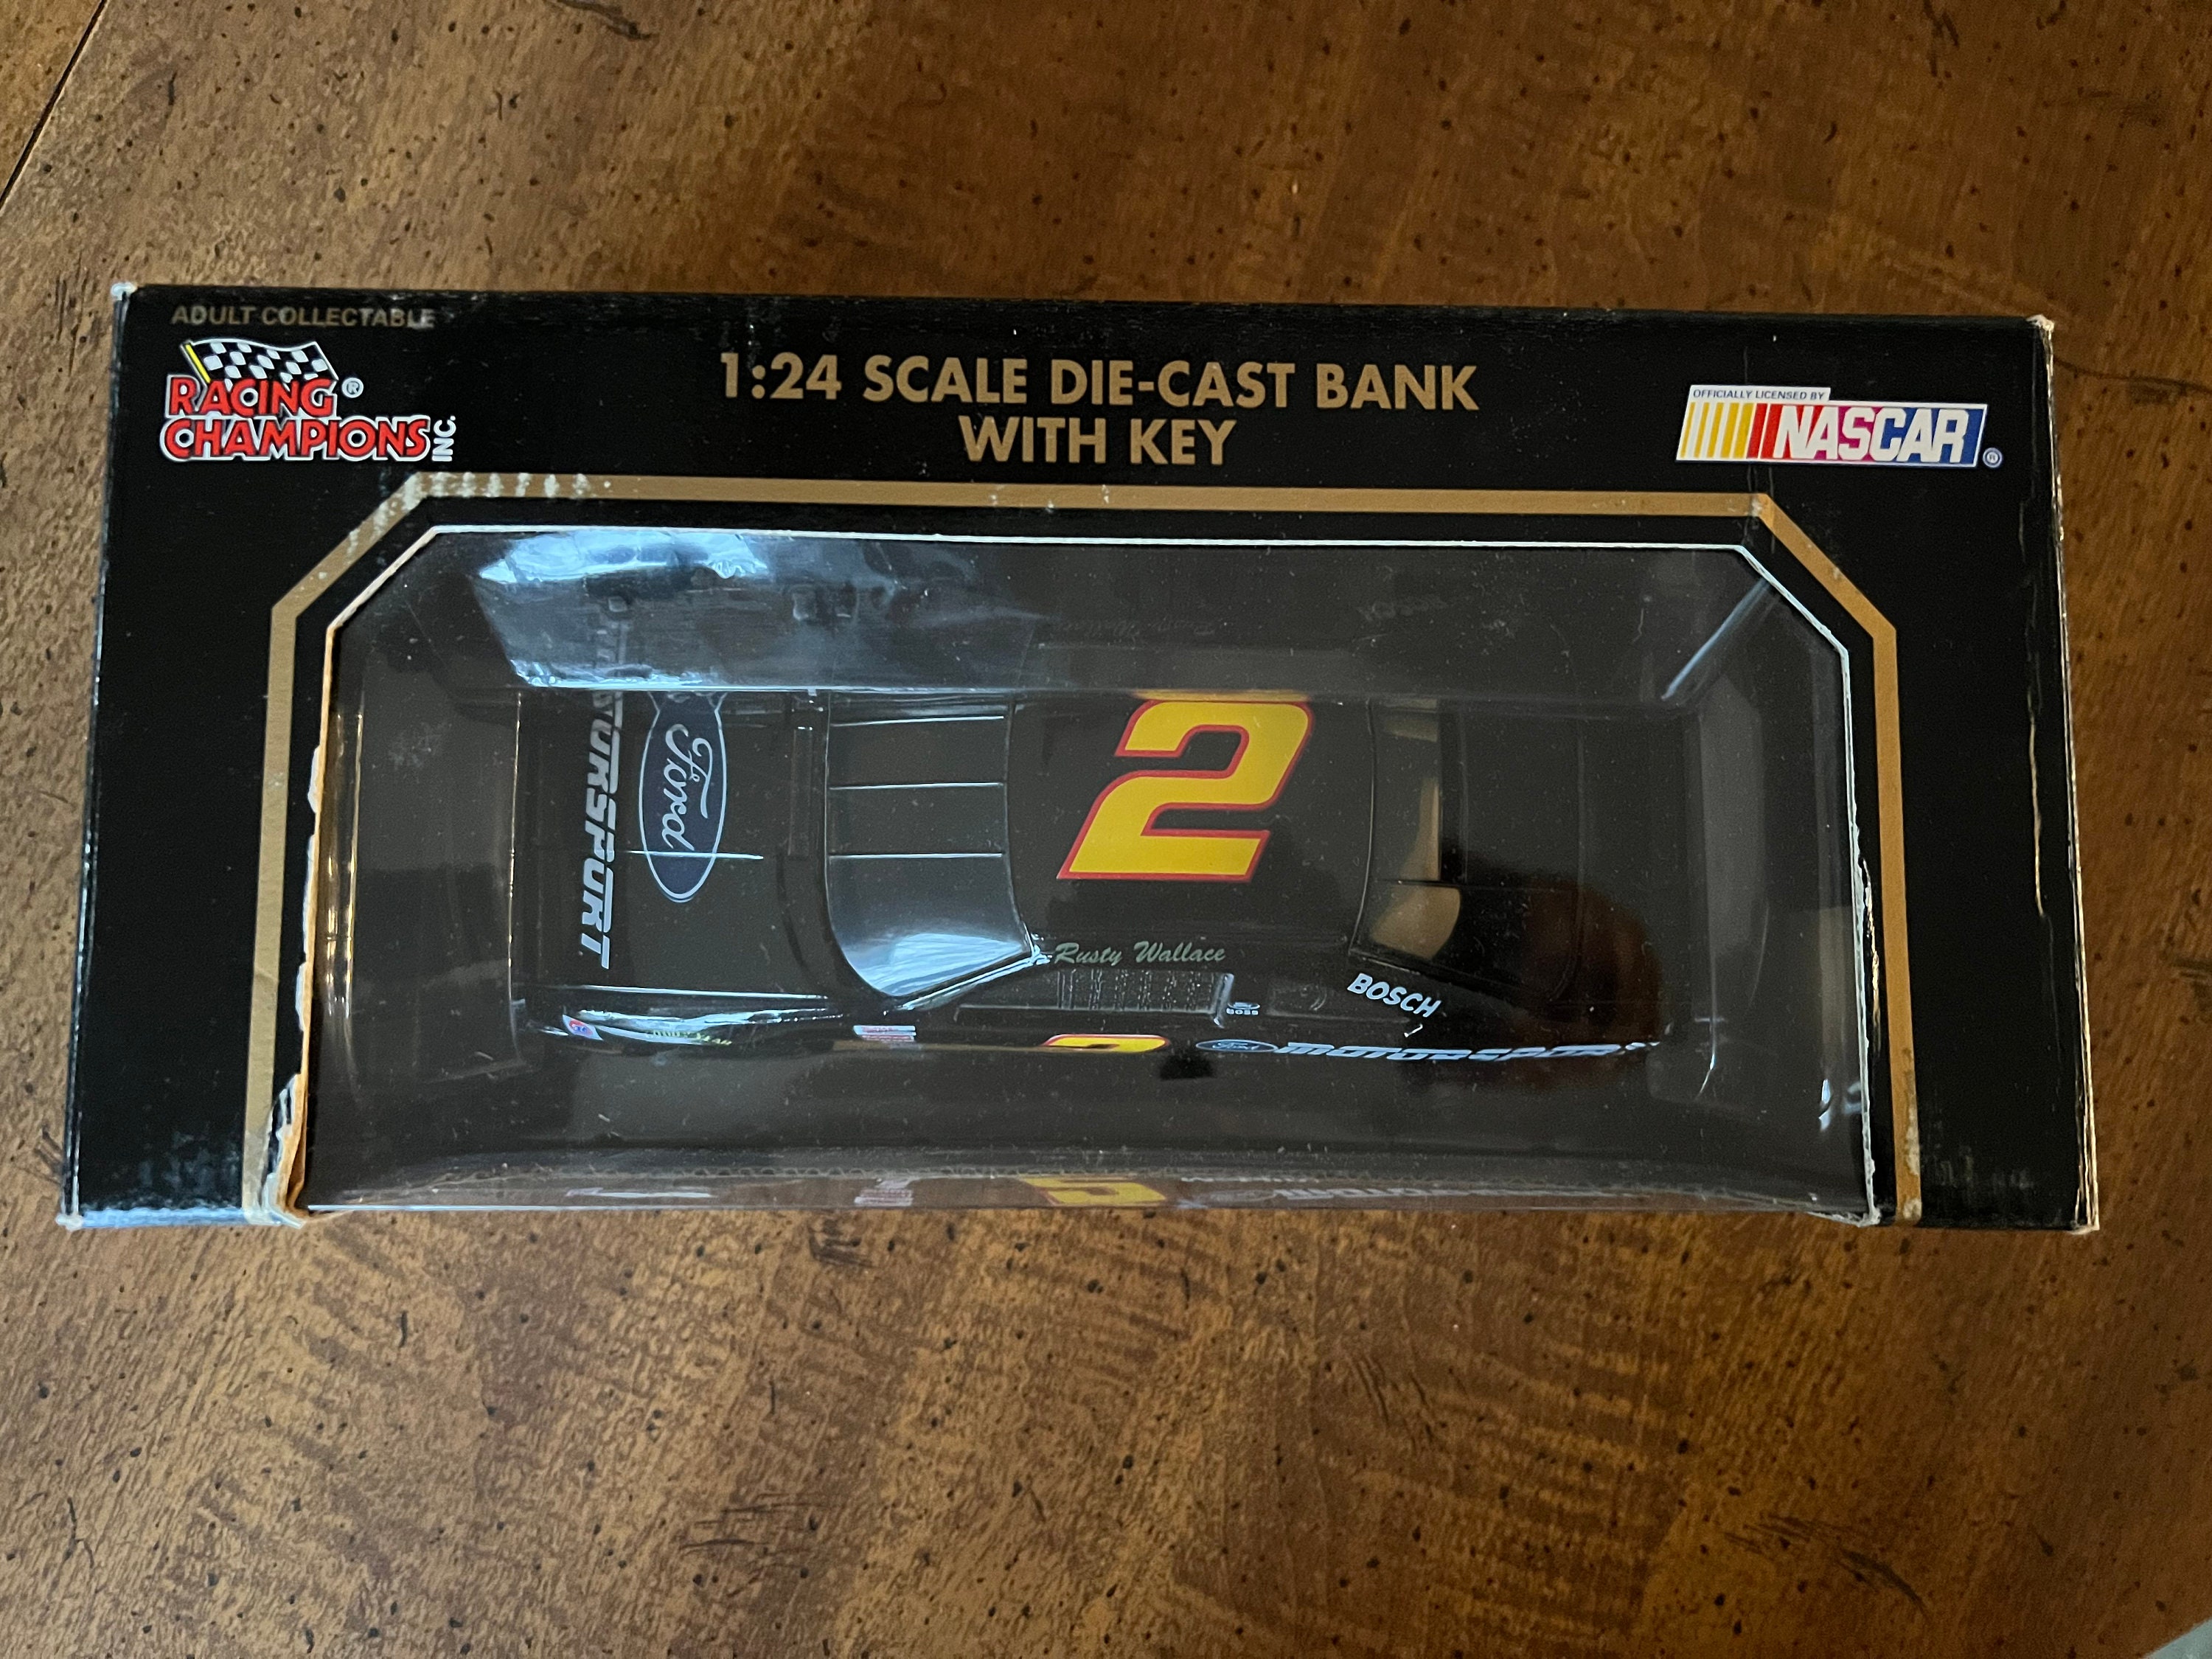 1994 Ford Motorsport Rusty Wallace 2 Nascar Diecast Bank With Key